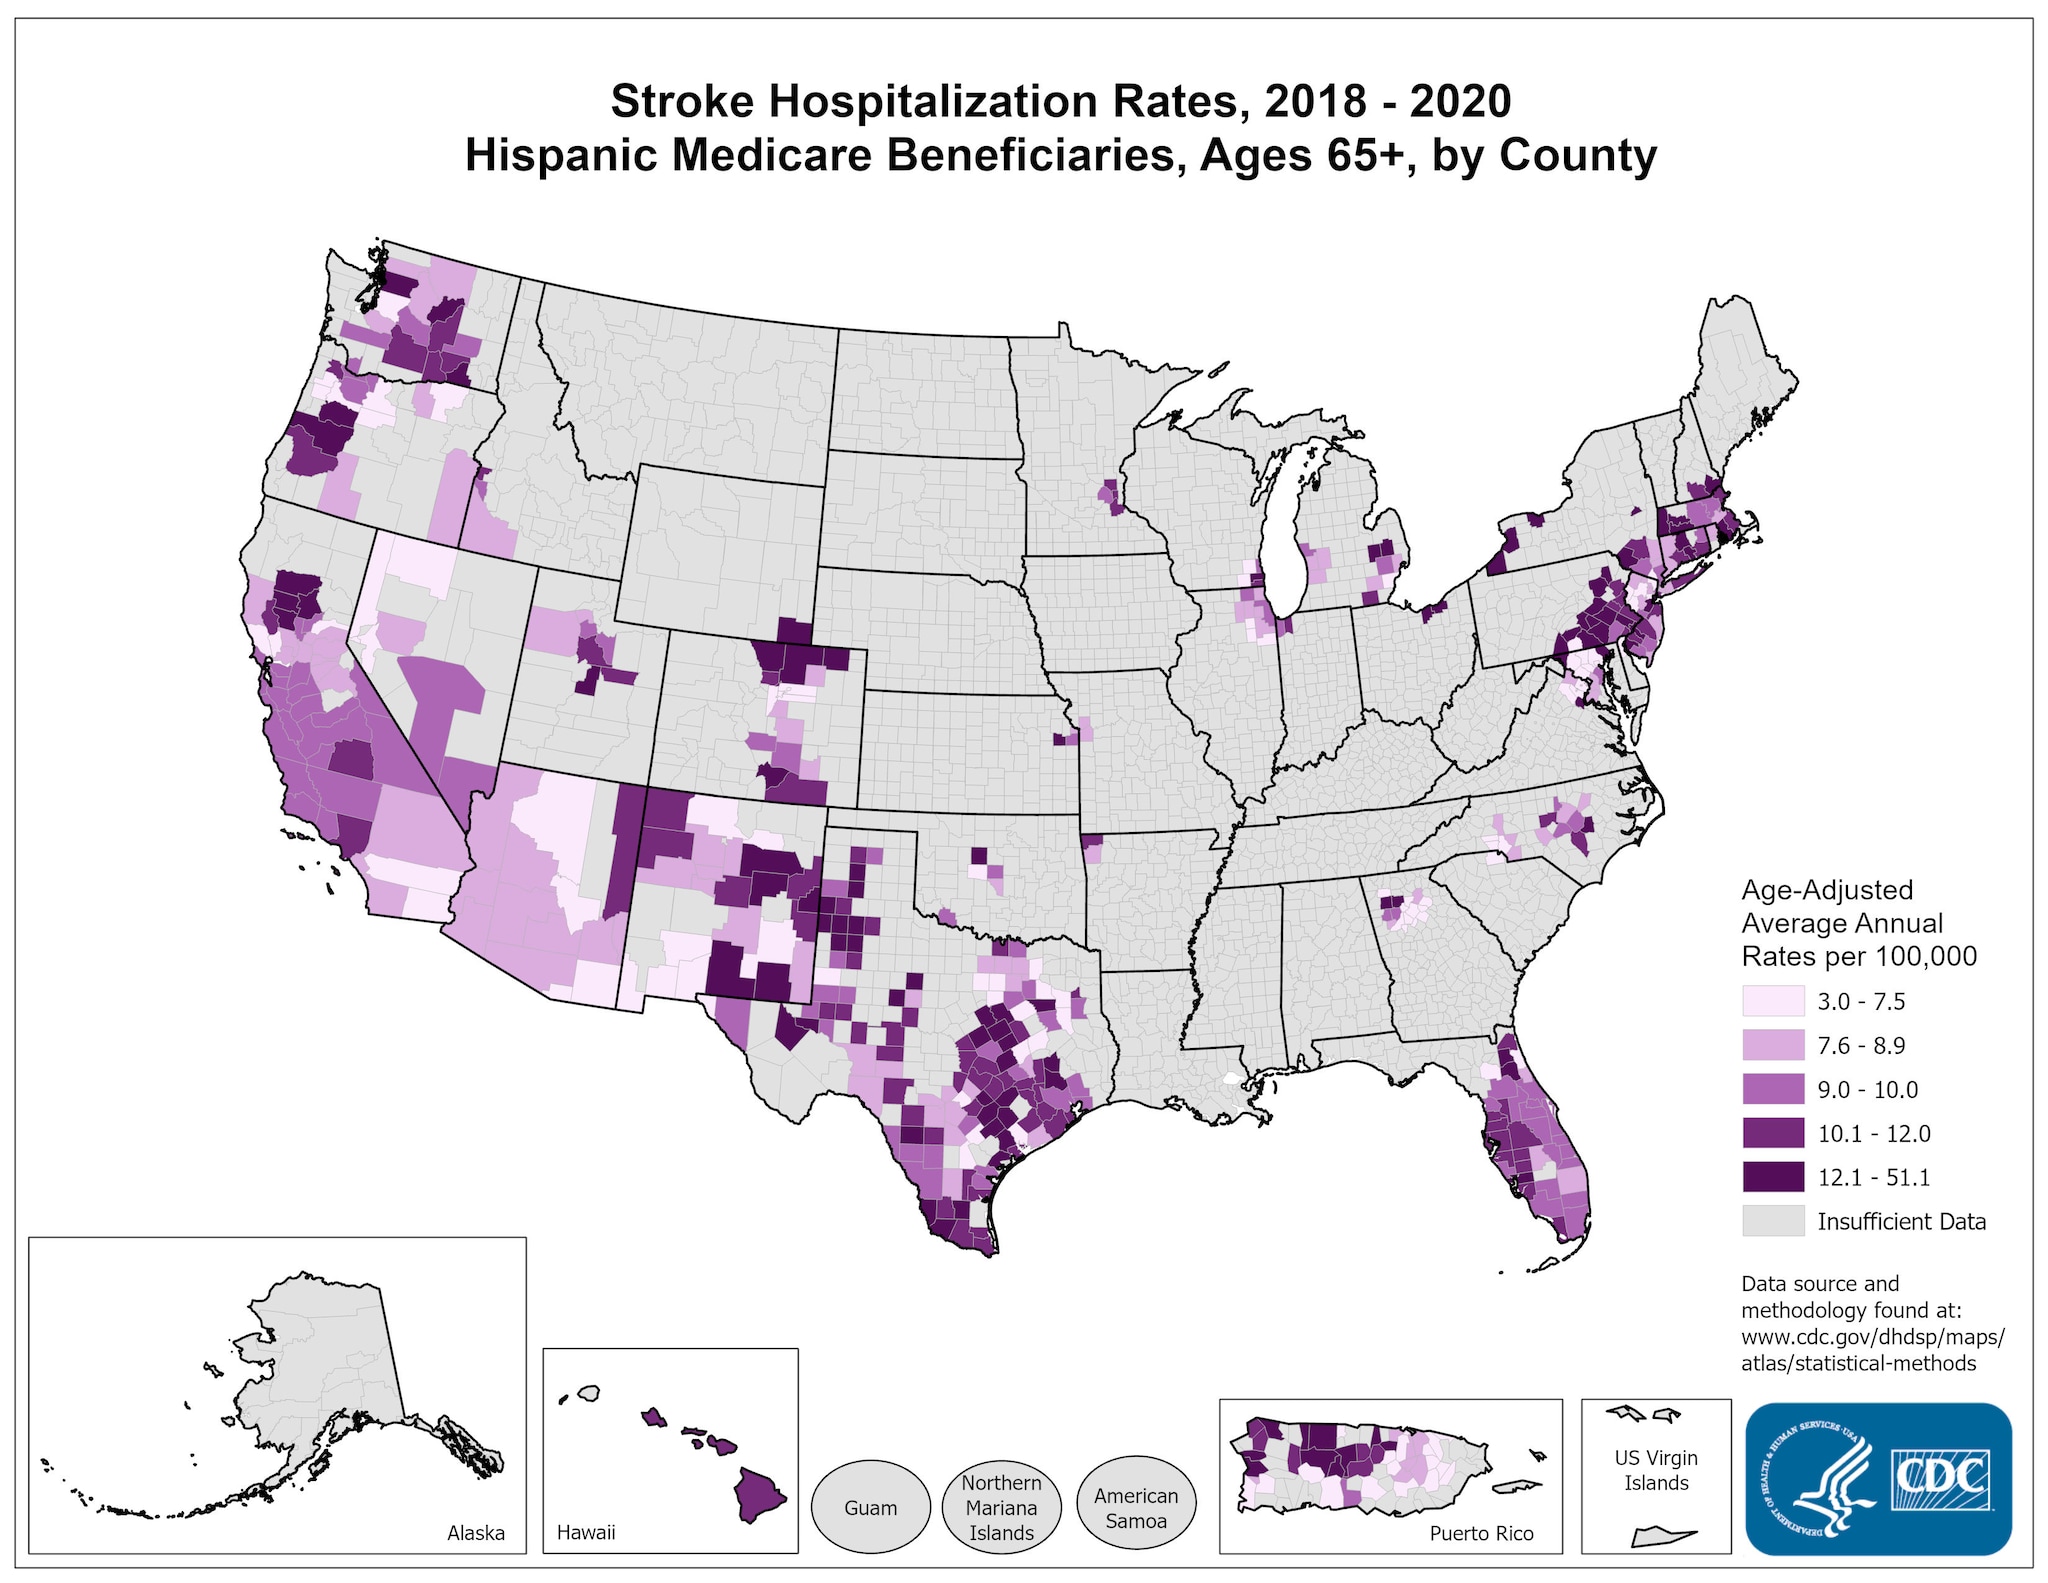 Stroke Hospitalization Rates for 2015 through 2017 for Hispanics Aged 65 Years and Older by County. The map shows that concentrations of counties with the highest stroke hospitalization rates - meaning the top quintile - are located primarily in Texas, Florida, New Mexico, Arizona, Utah, Massachusetts, Connecticut, Pennsylvania, New Jersey, Delaware, and New York.